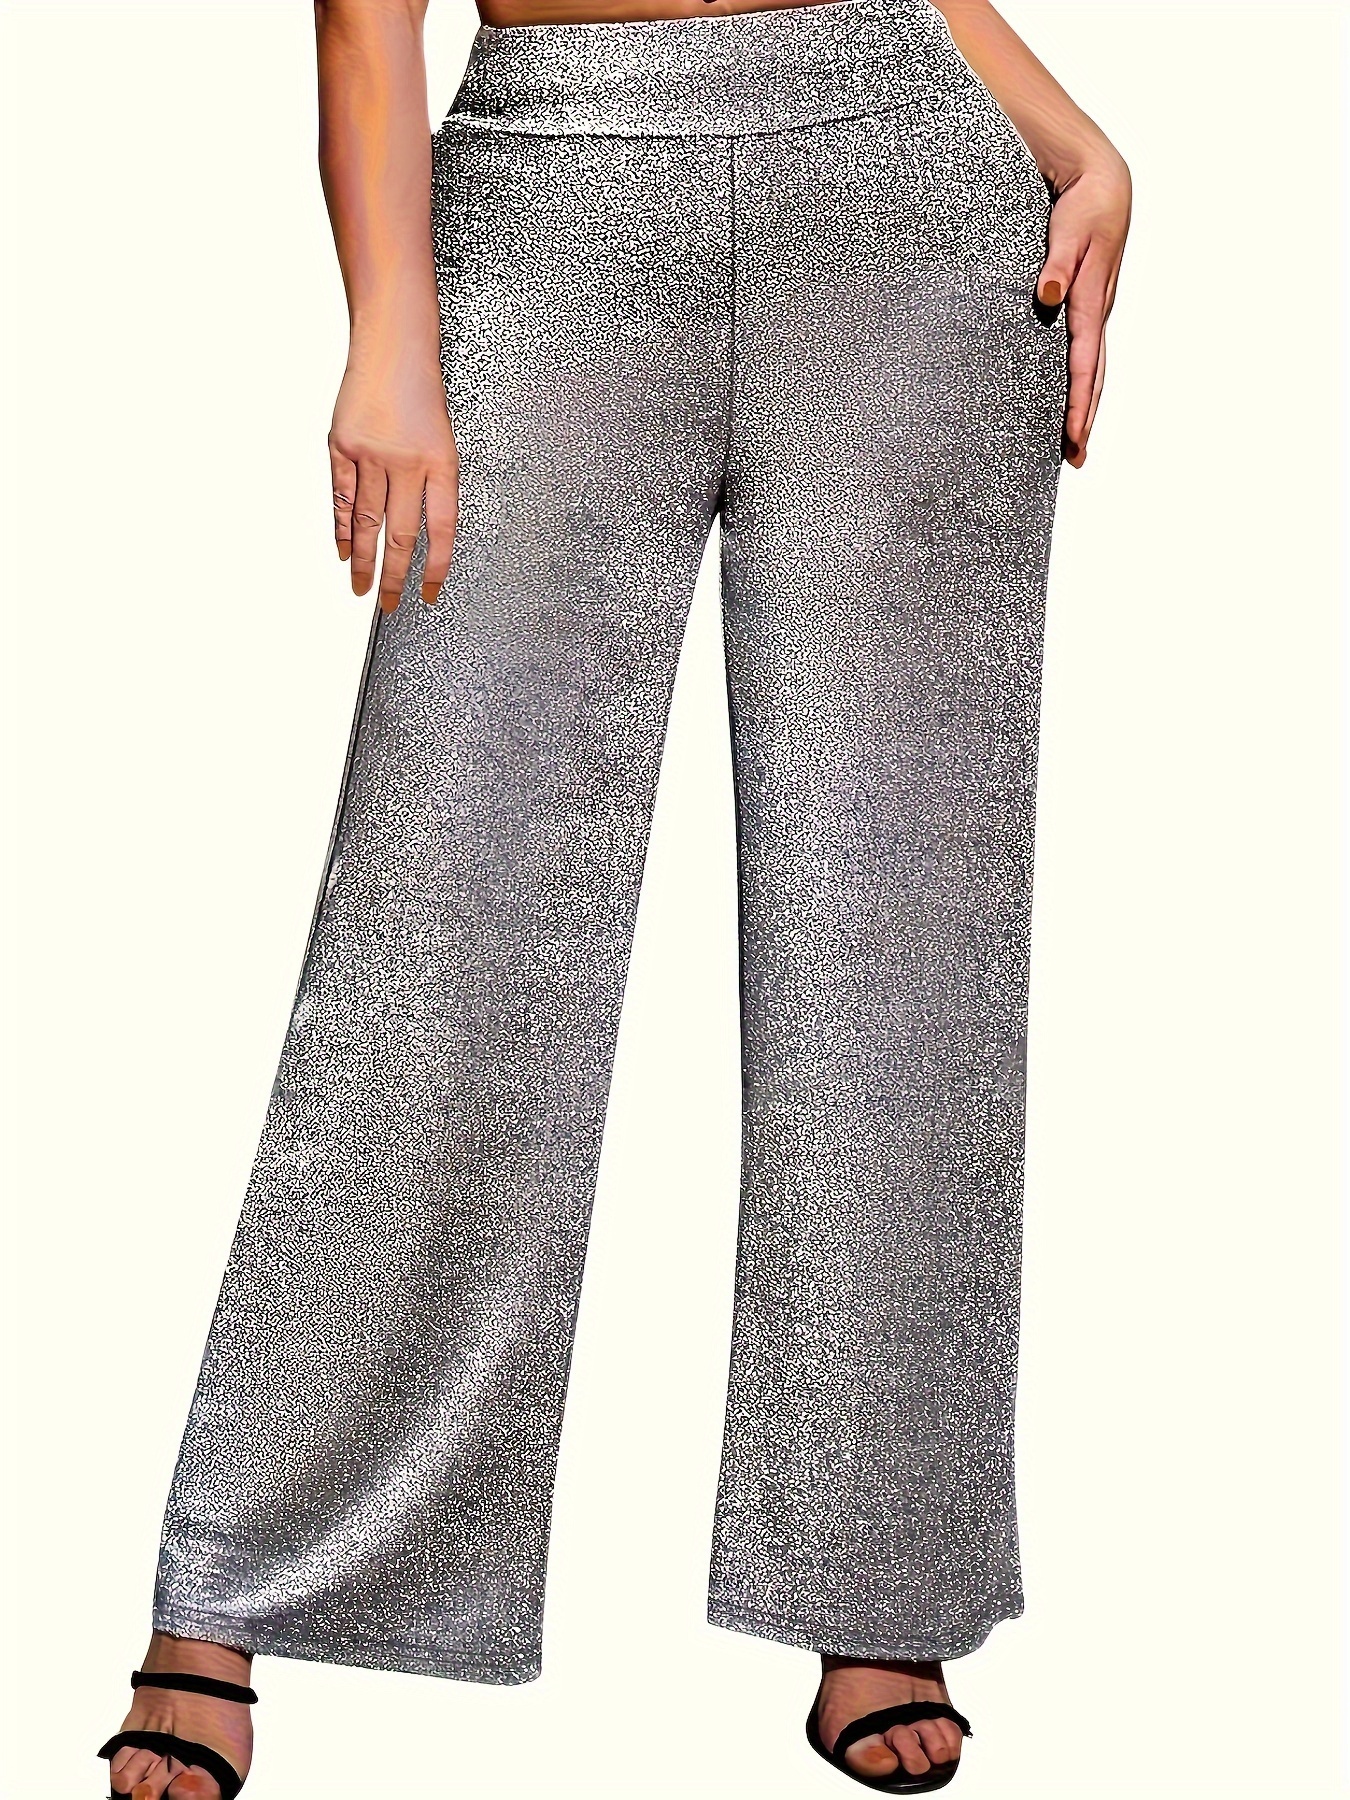 Women's Silver Shimmer Leggings Free and Plus Size